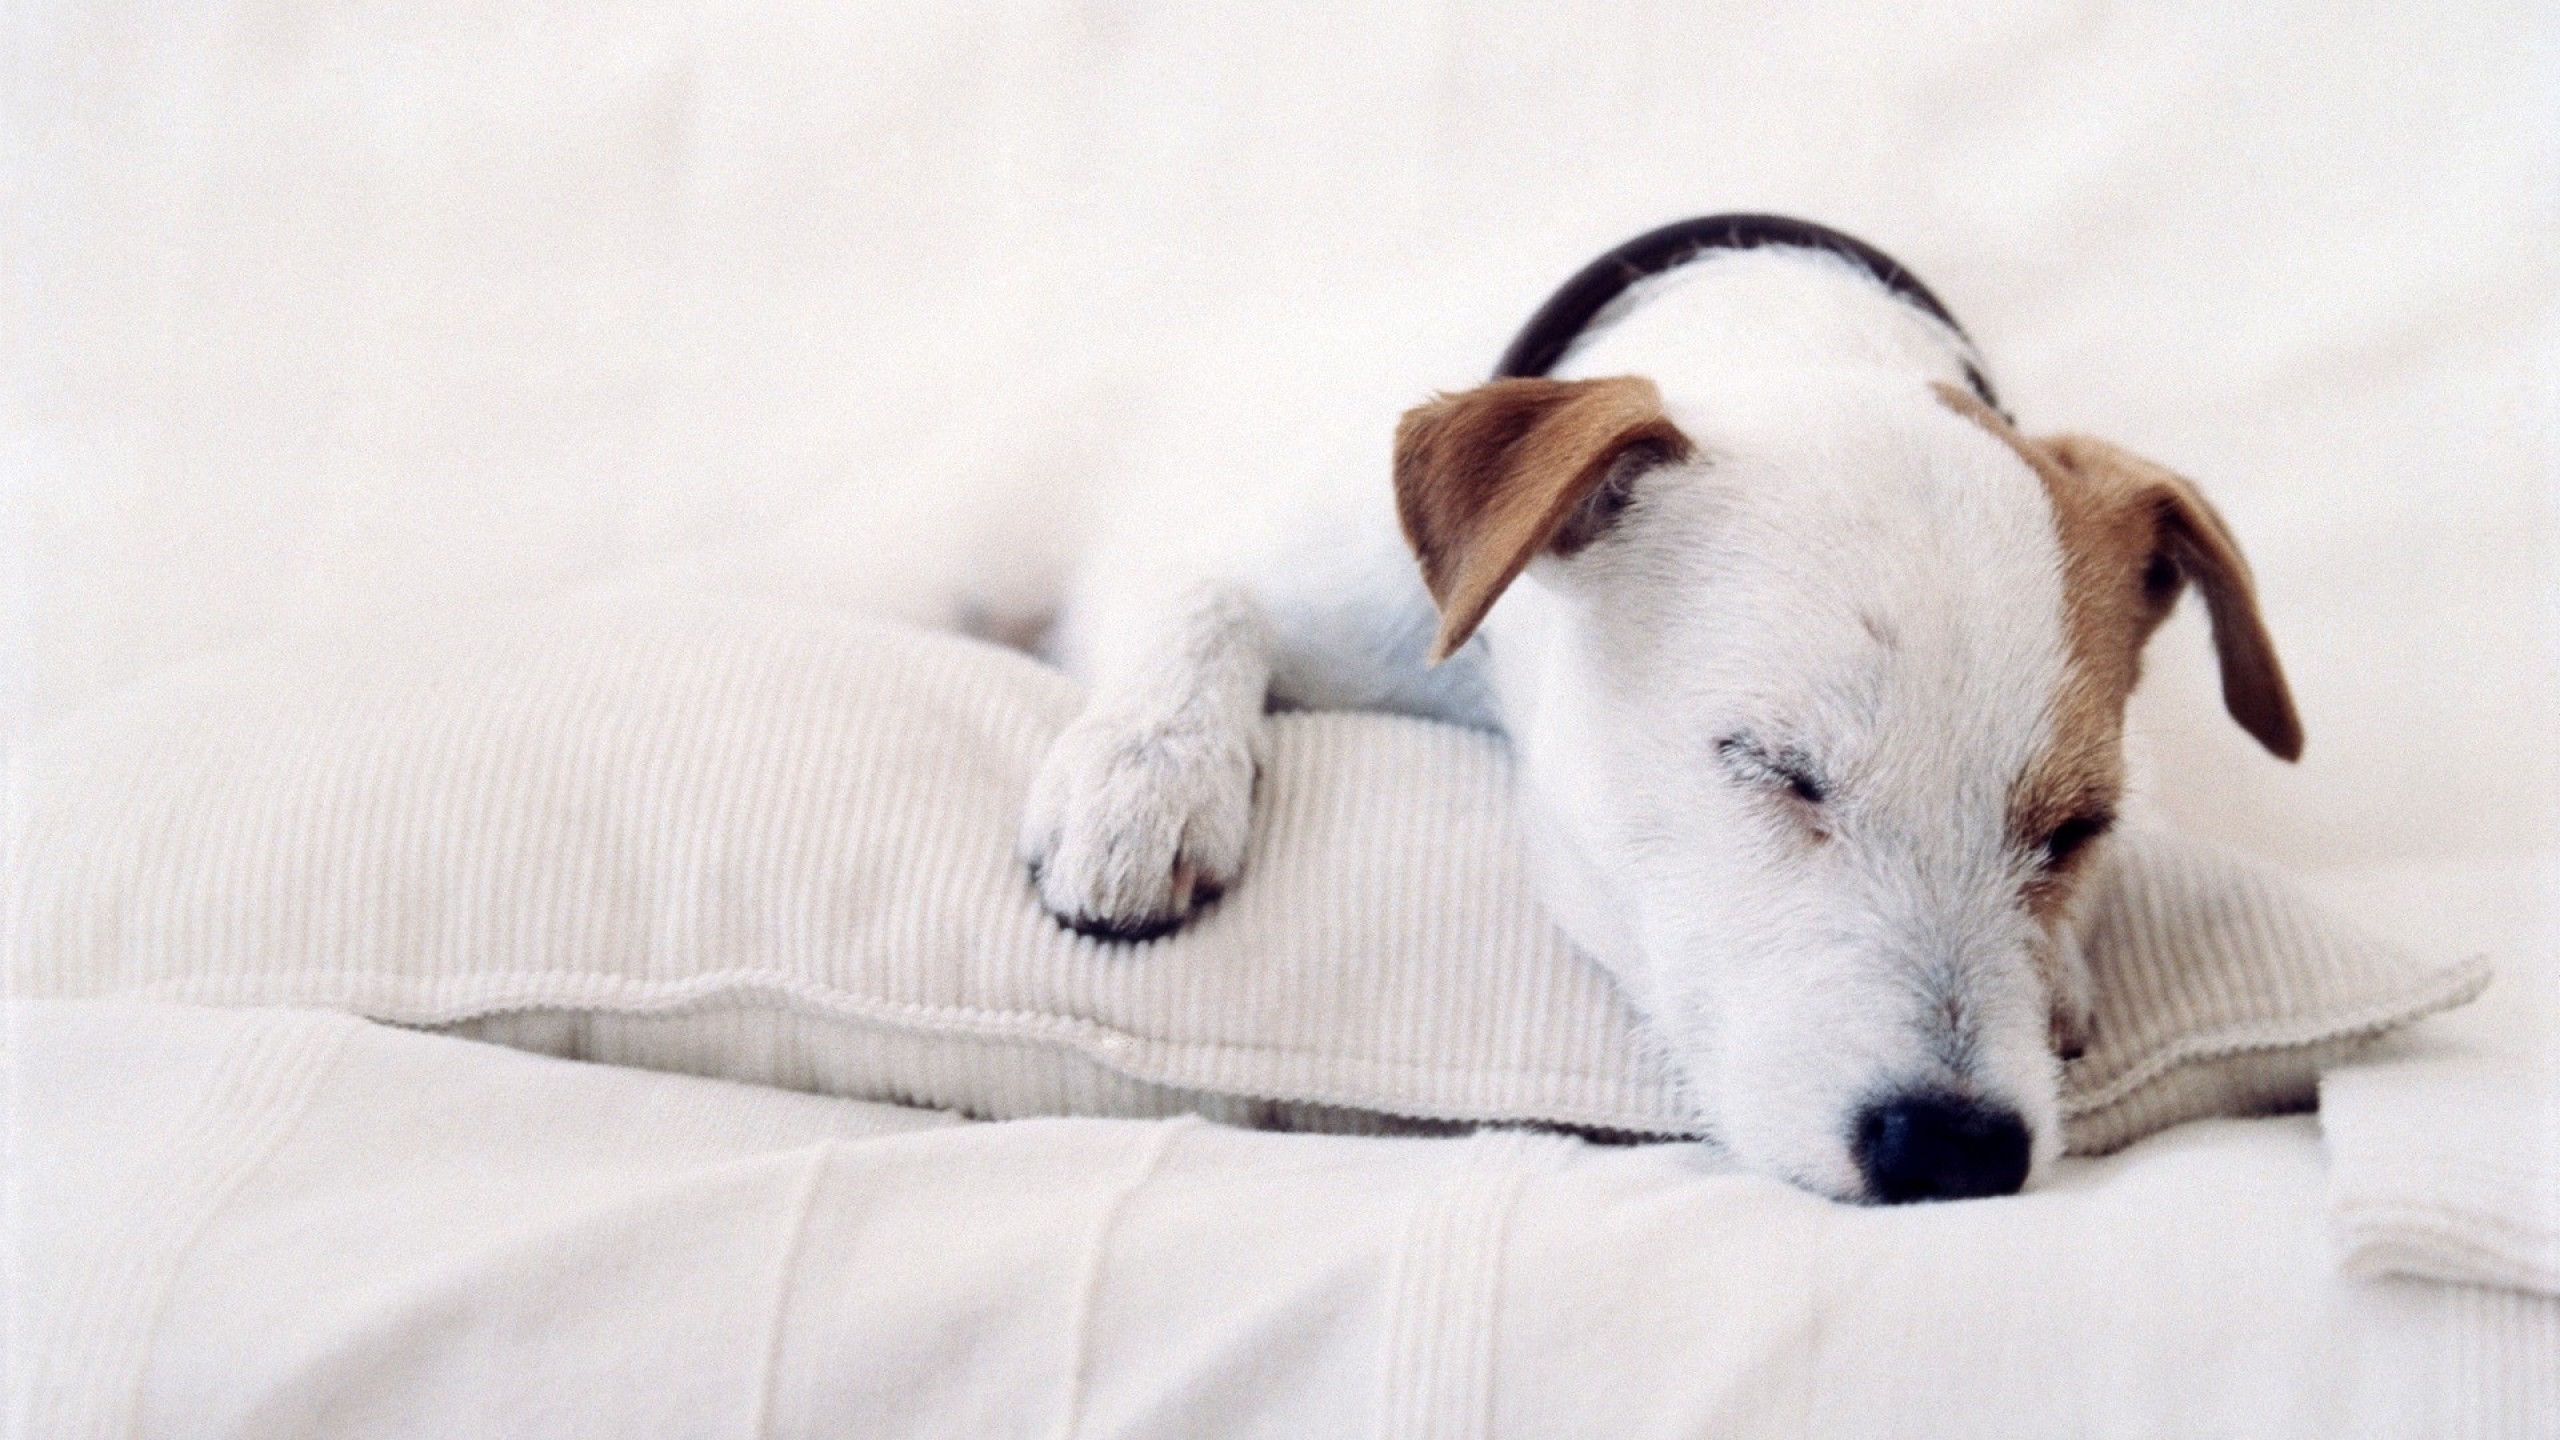 2560x1440 Download Wallpaper Â· Back. dogs jack russell terrier ...